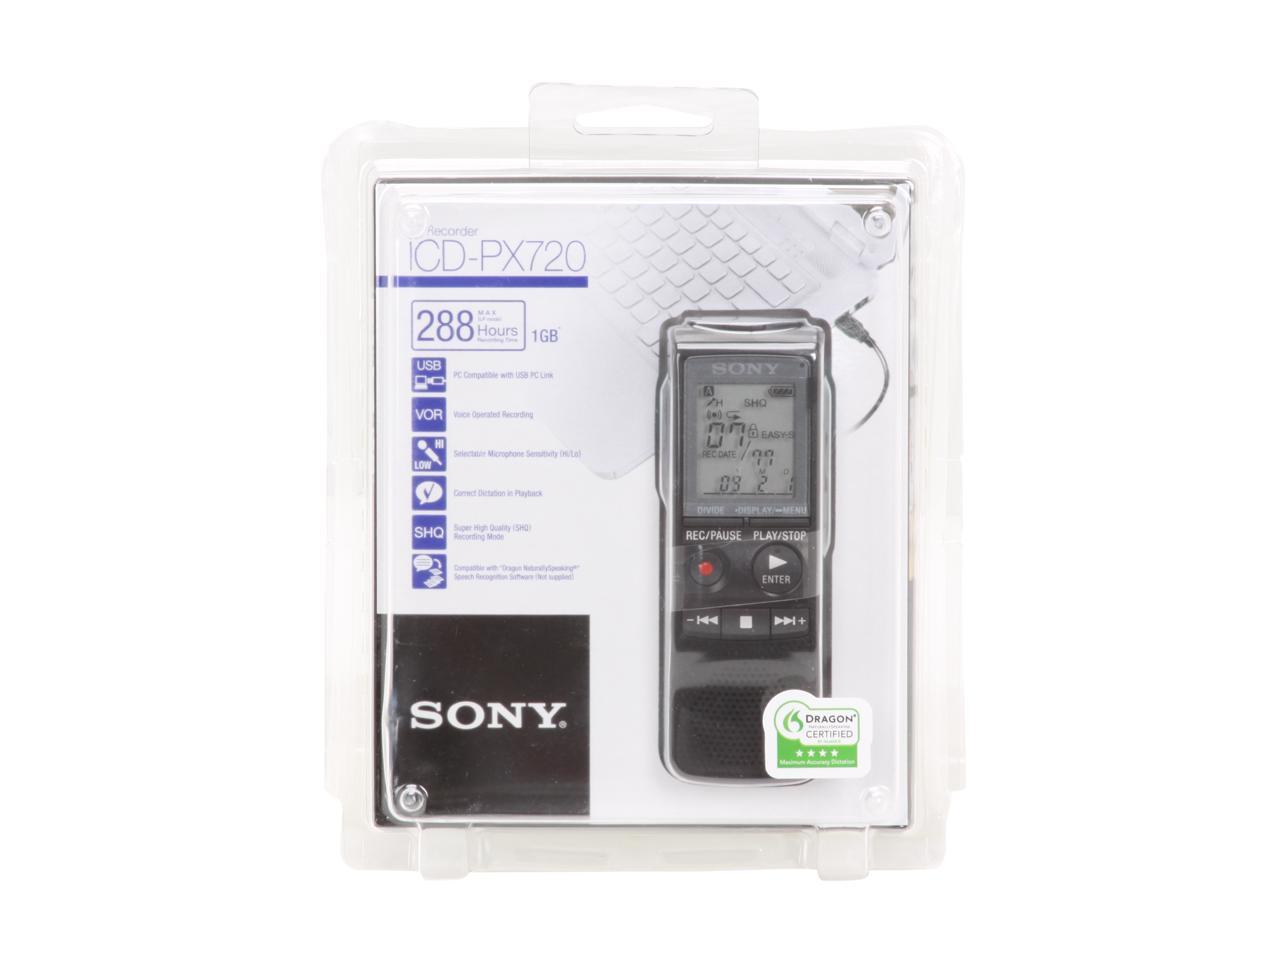 sony icd px720 software download mac